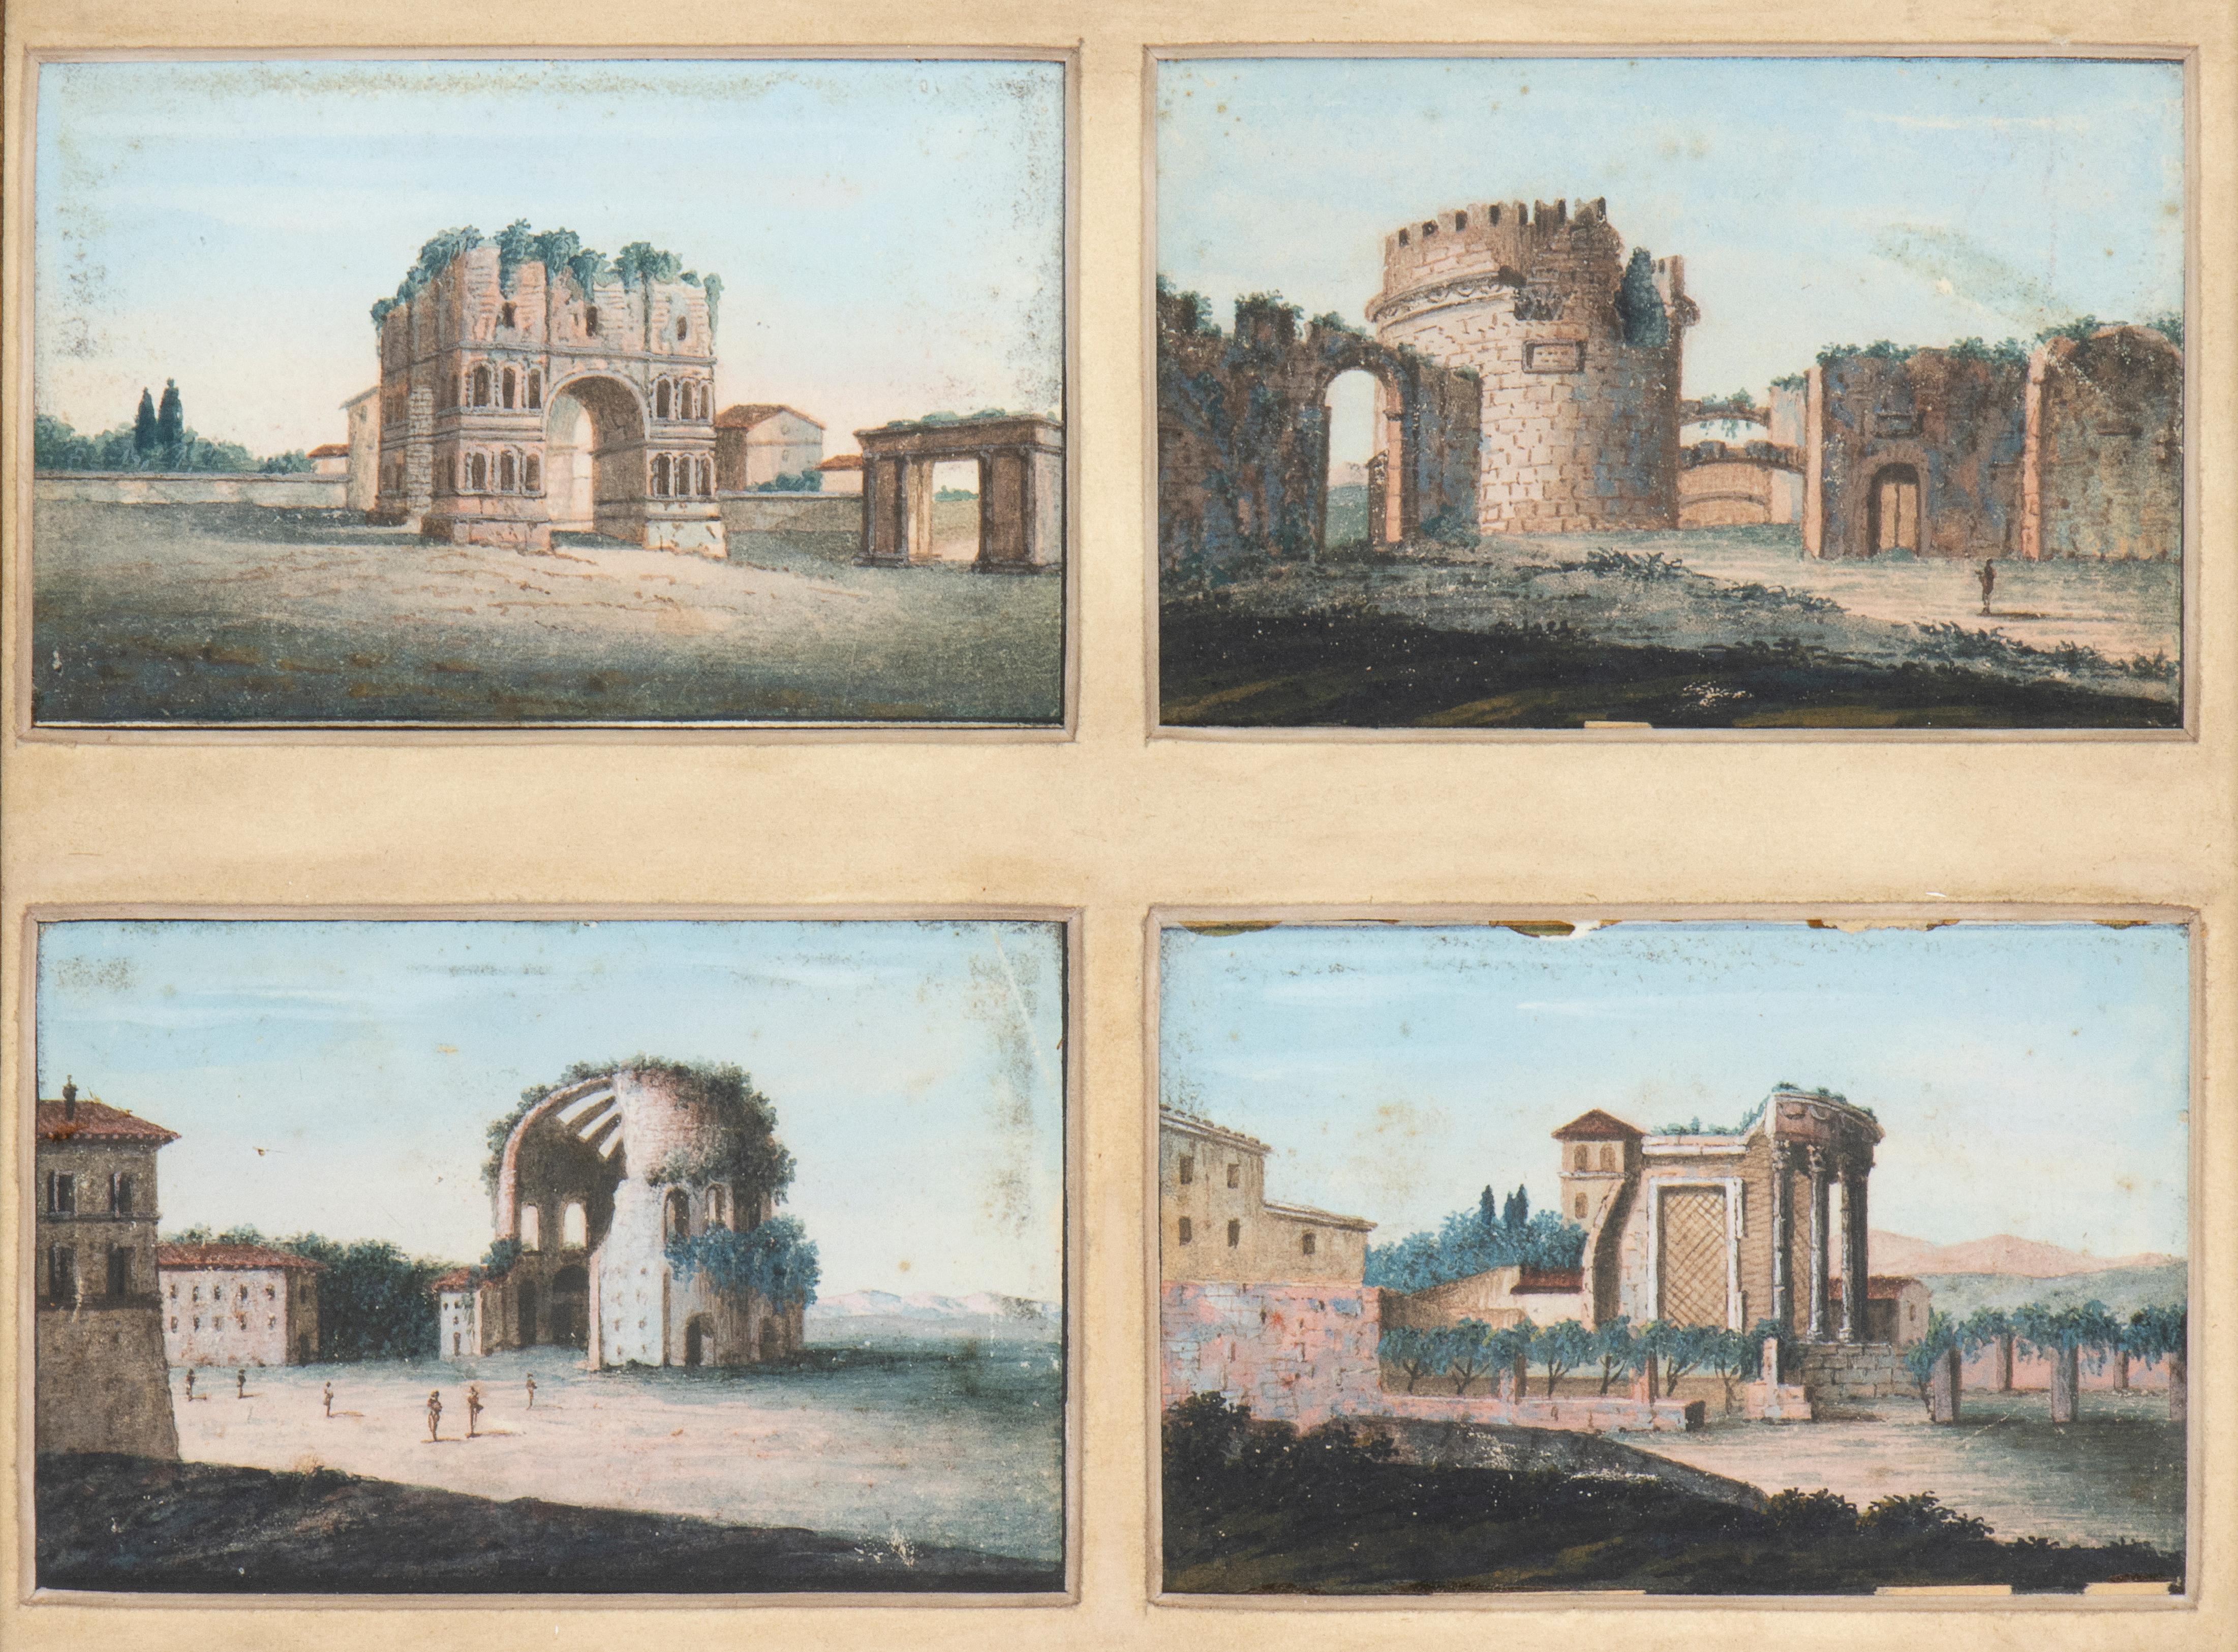 A set of 4  views of Romans important sites painting tempera on paper grand tour  , framed in a coeval gilt wood frame. The arch of Janus, the mausoleum of Caecilia Metella, the Temple of Minerva Medica and the temple of Vesta in Tivoli. The classic